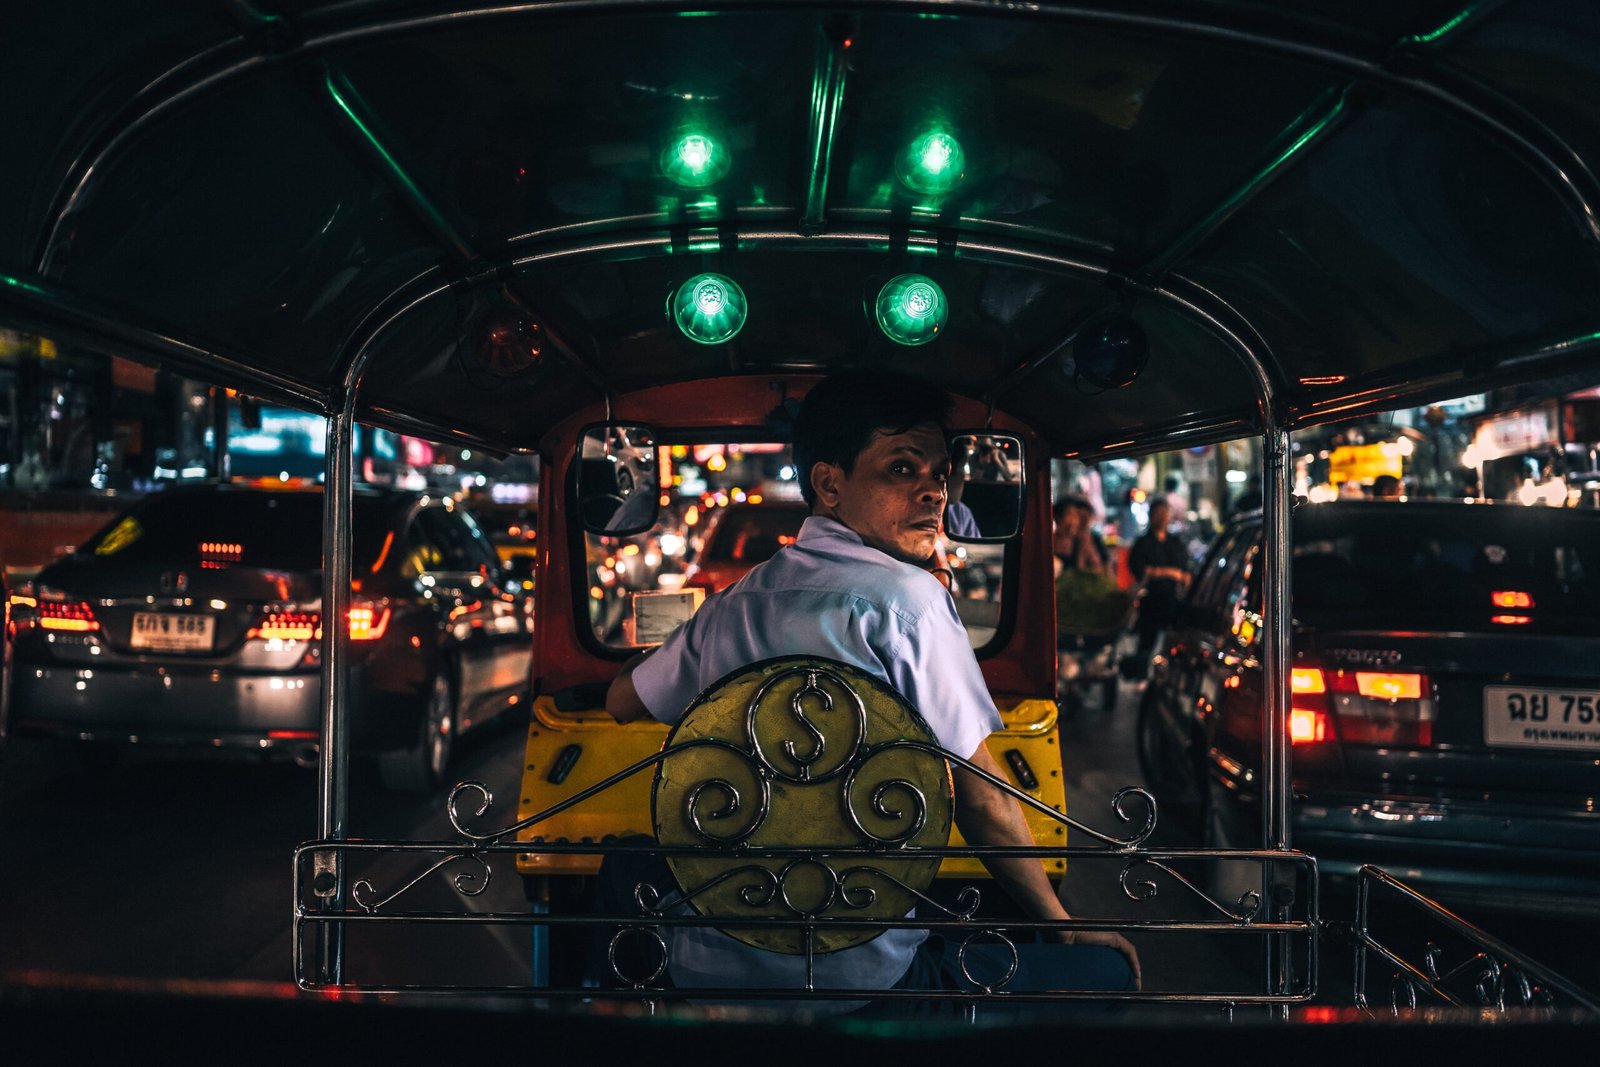 Tuk tuk driver in South East Asia at night time 